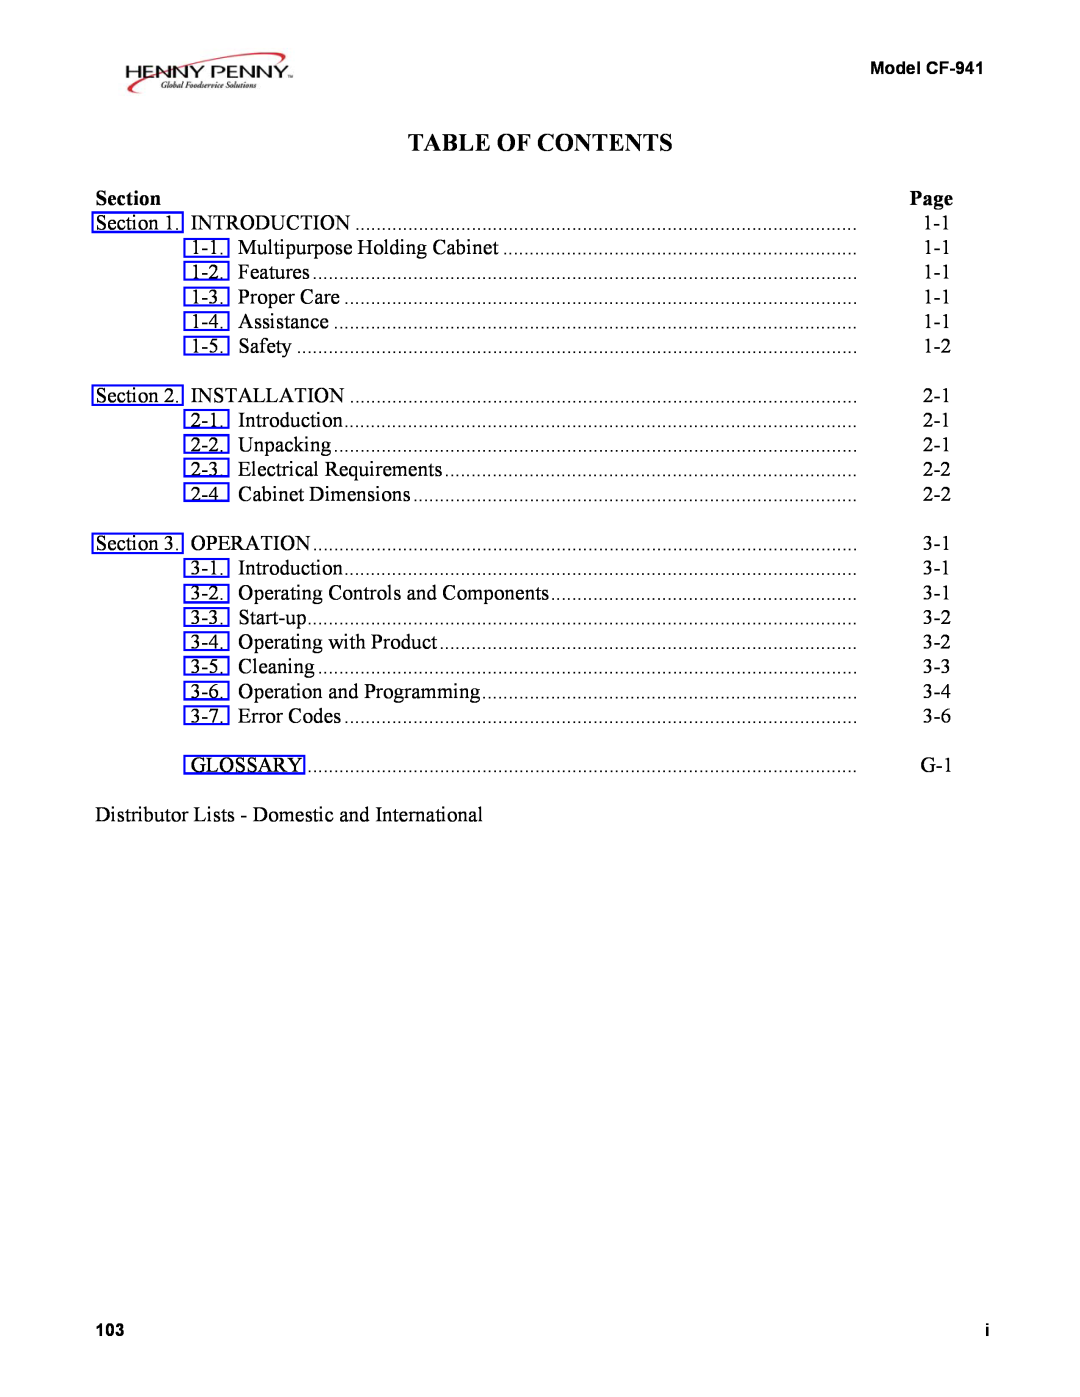 Henny Penny CF-941 warranty Table Of Contents, Section, Page 